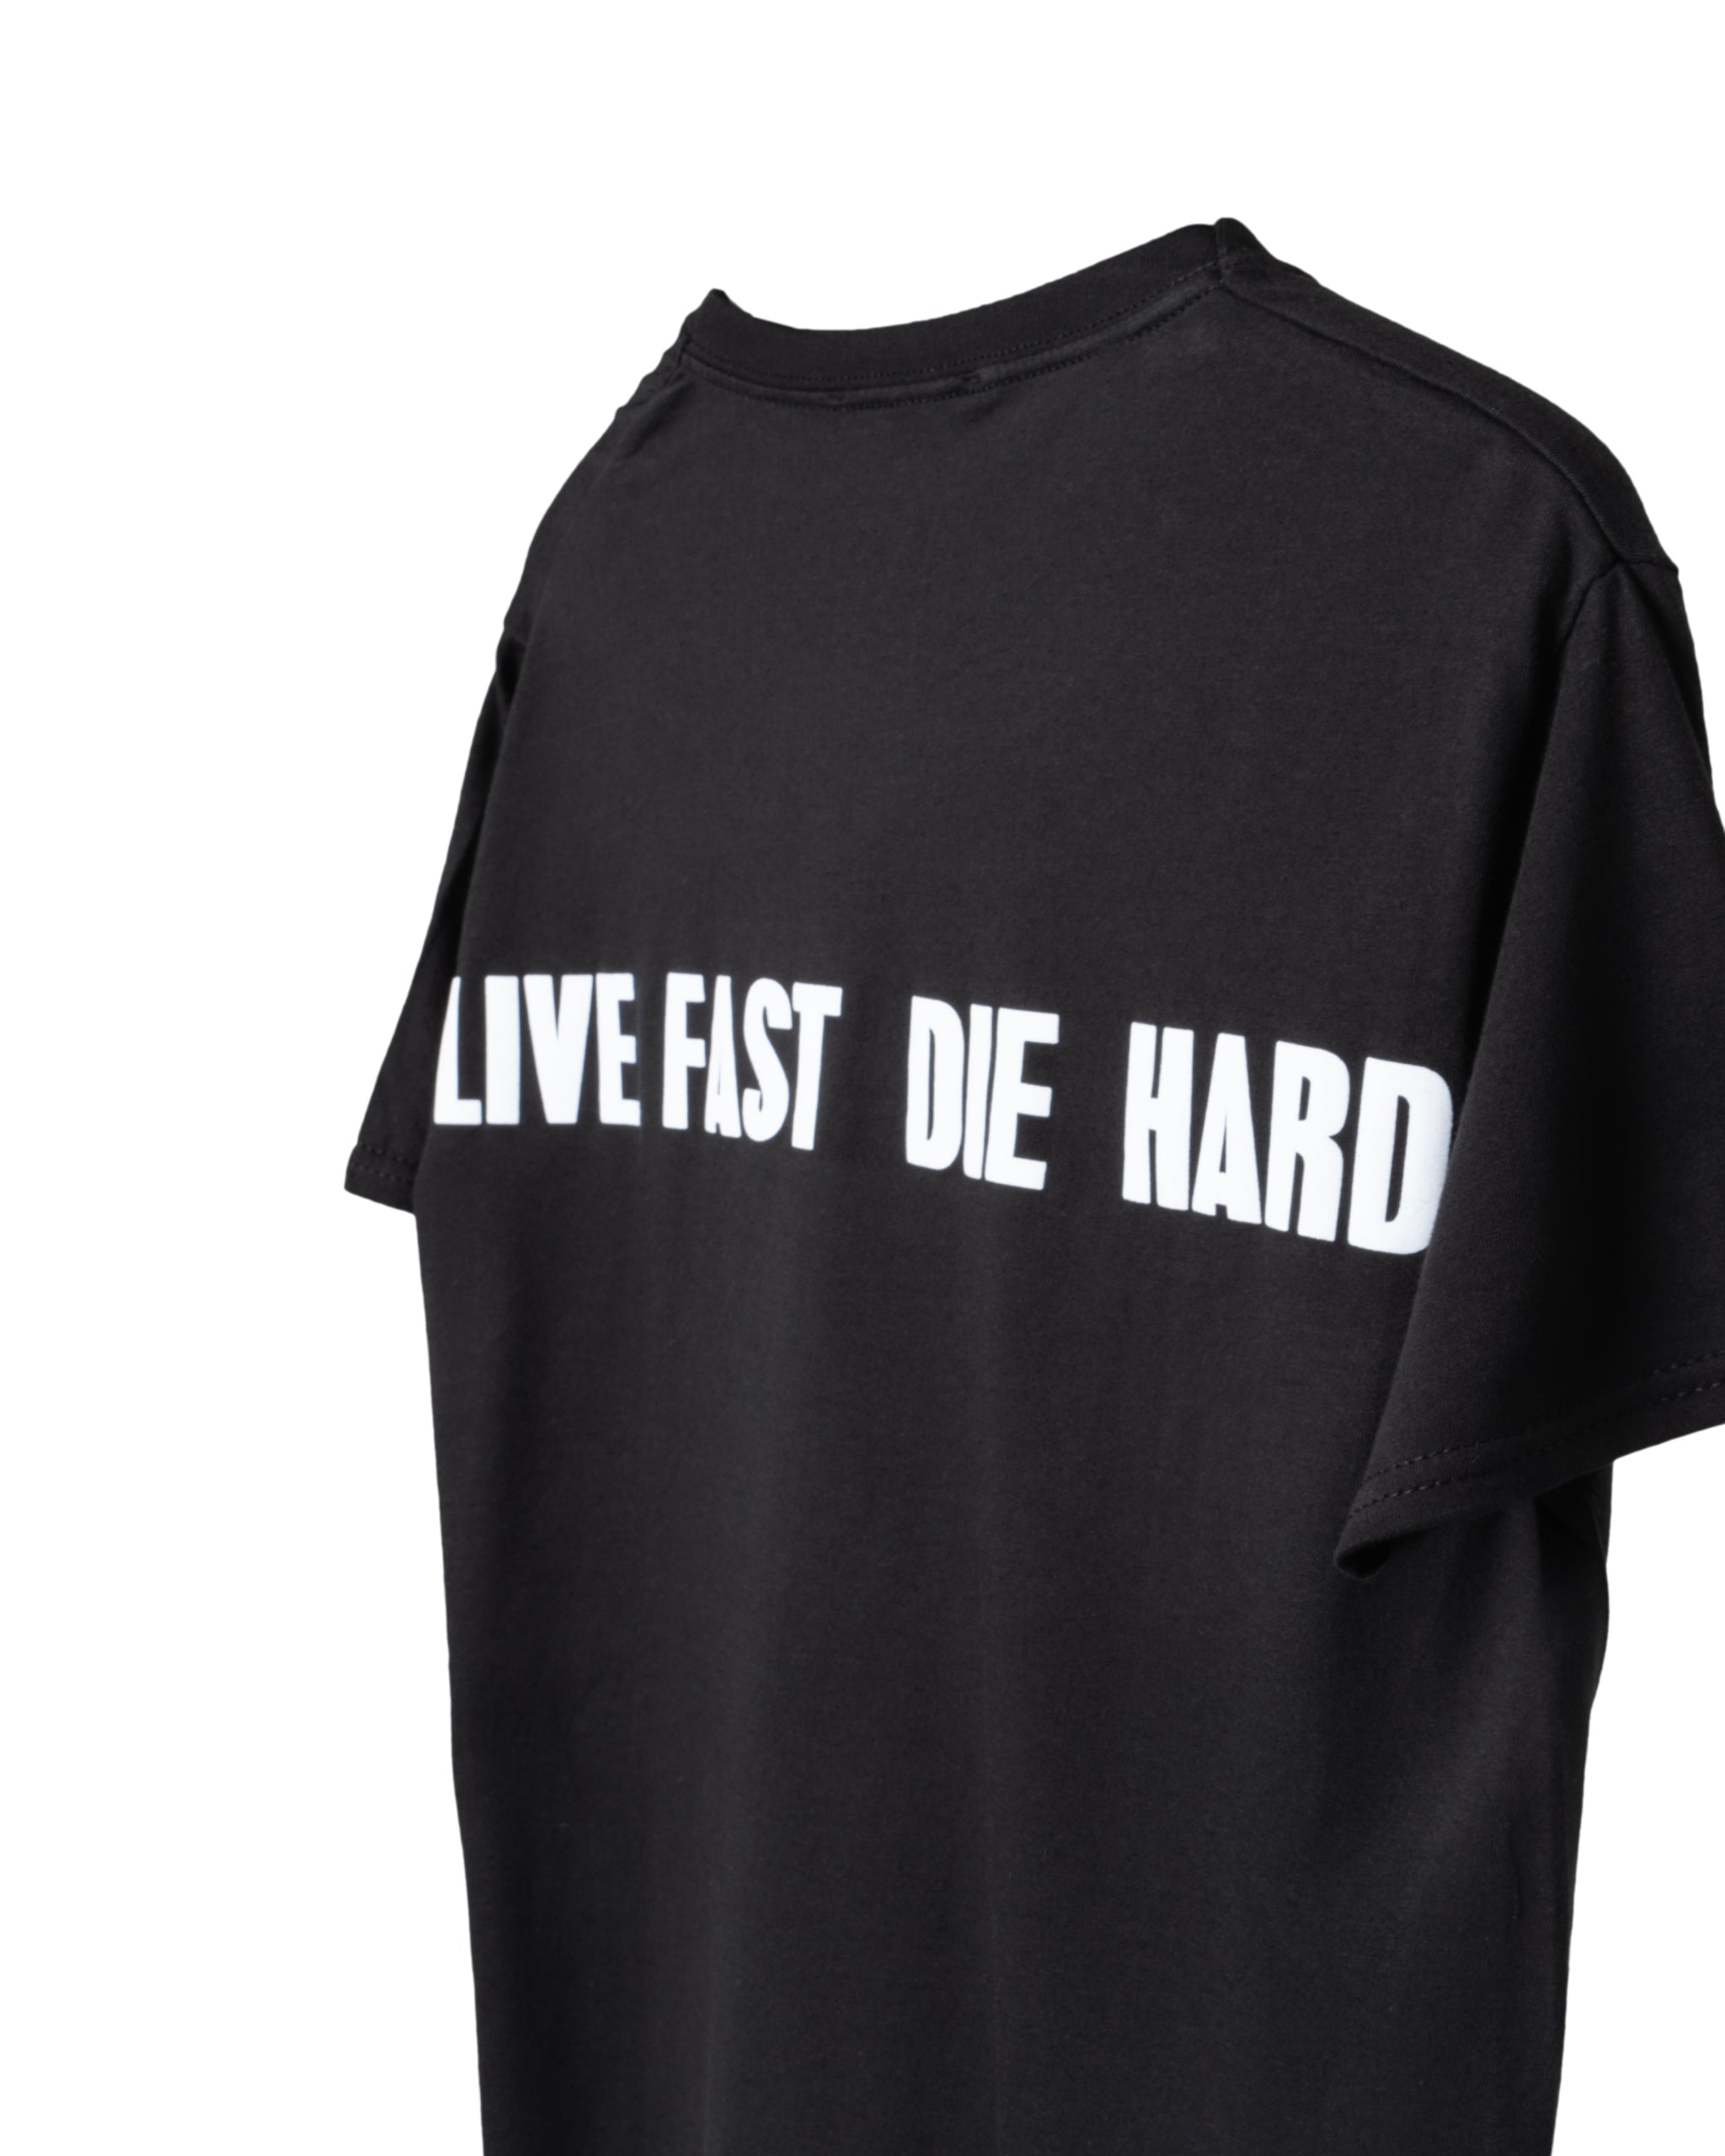 LIVE FAST DIE YOUNG  T-SHIRT